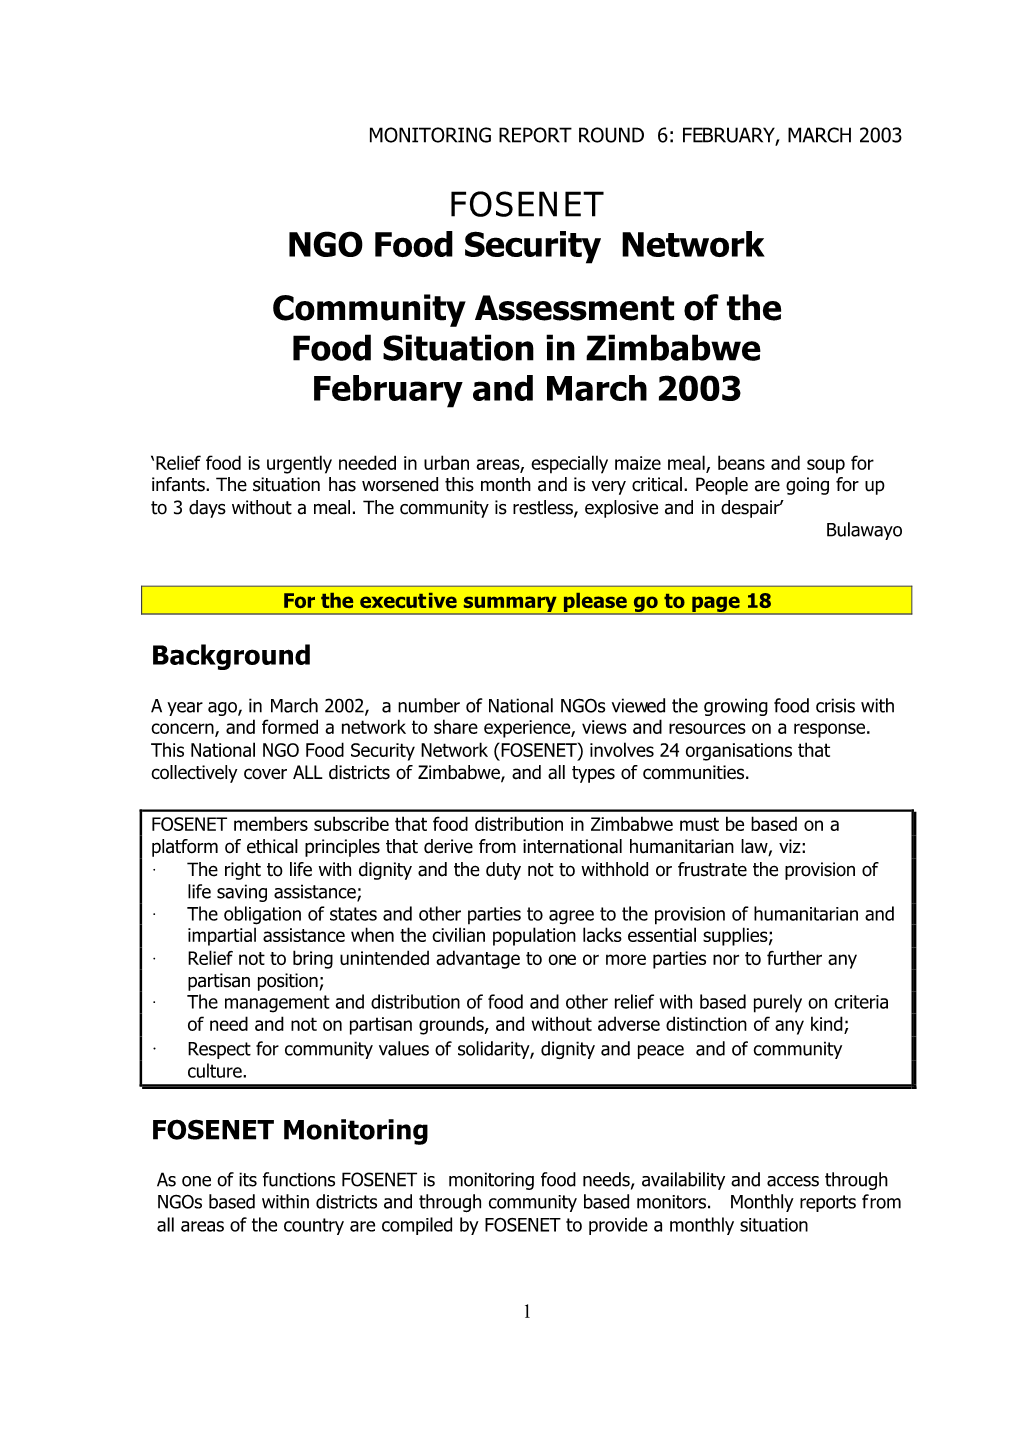 FOSENET NGO Food Security Network Community Assessment Of